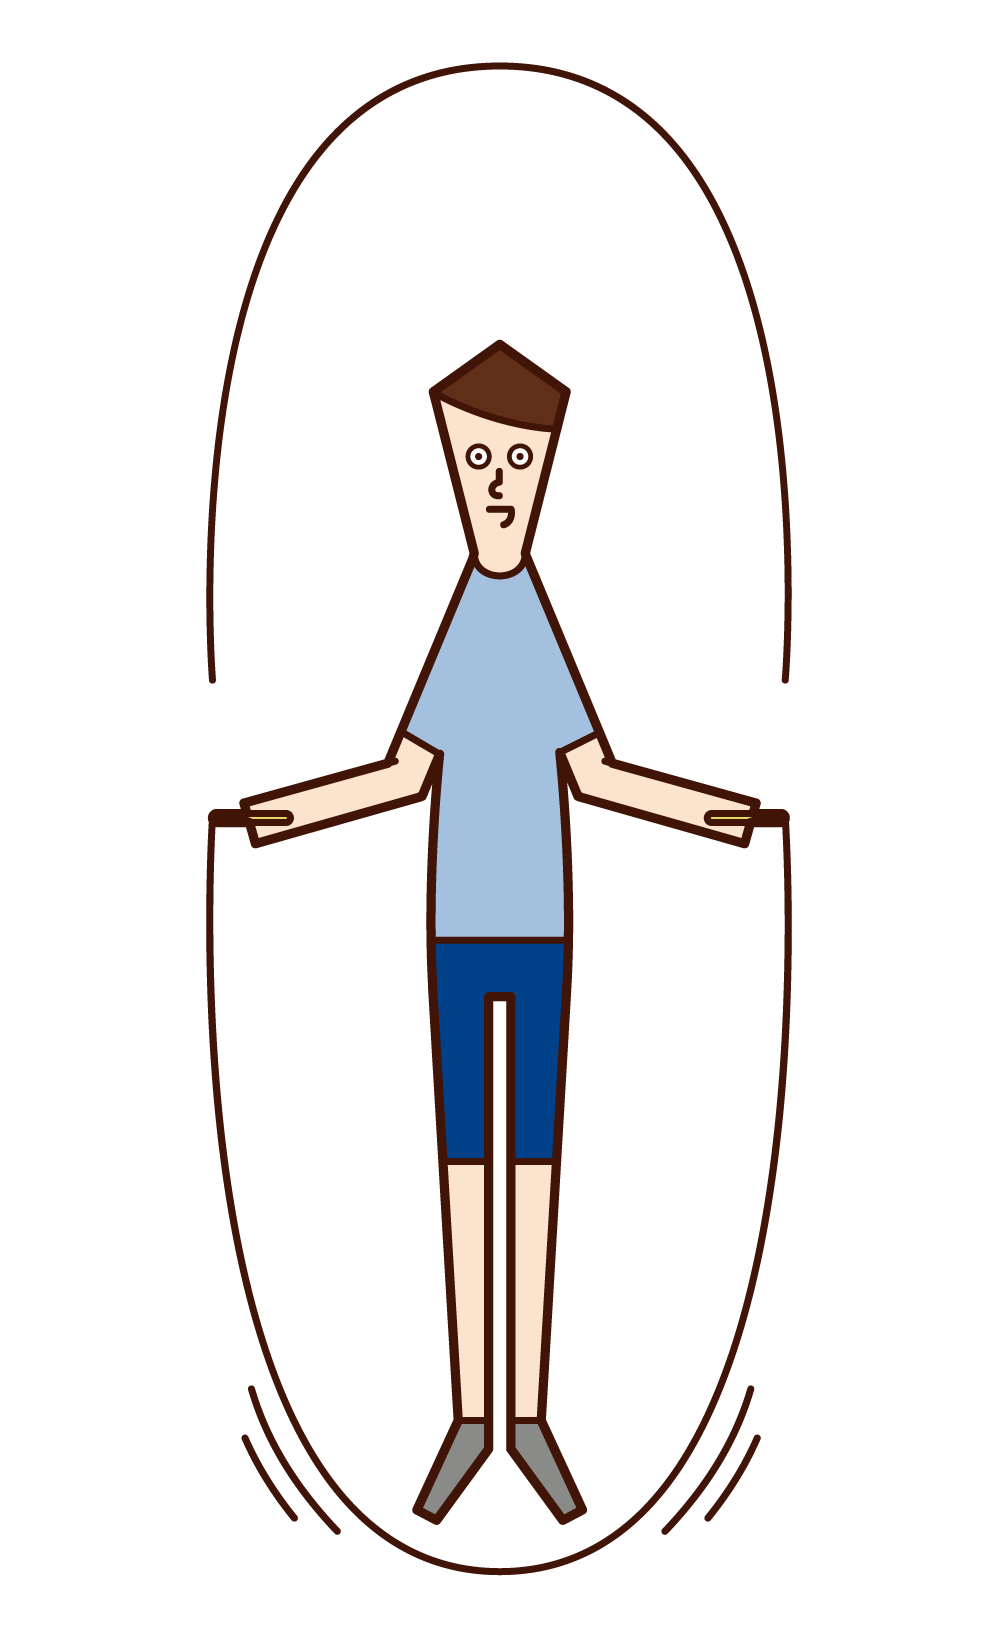 Illustration of a man jumping rope